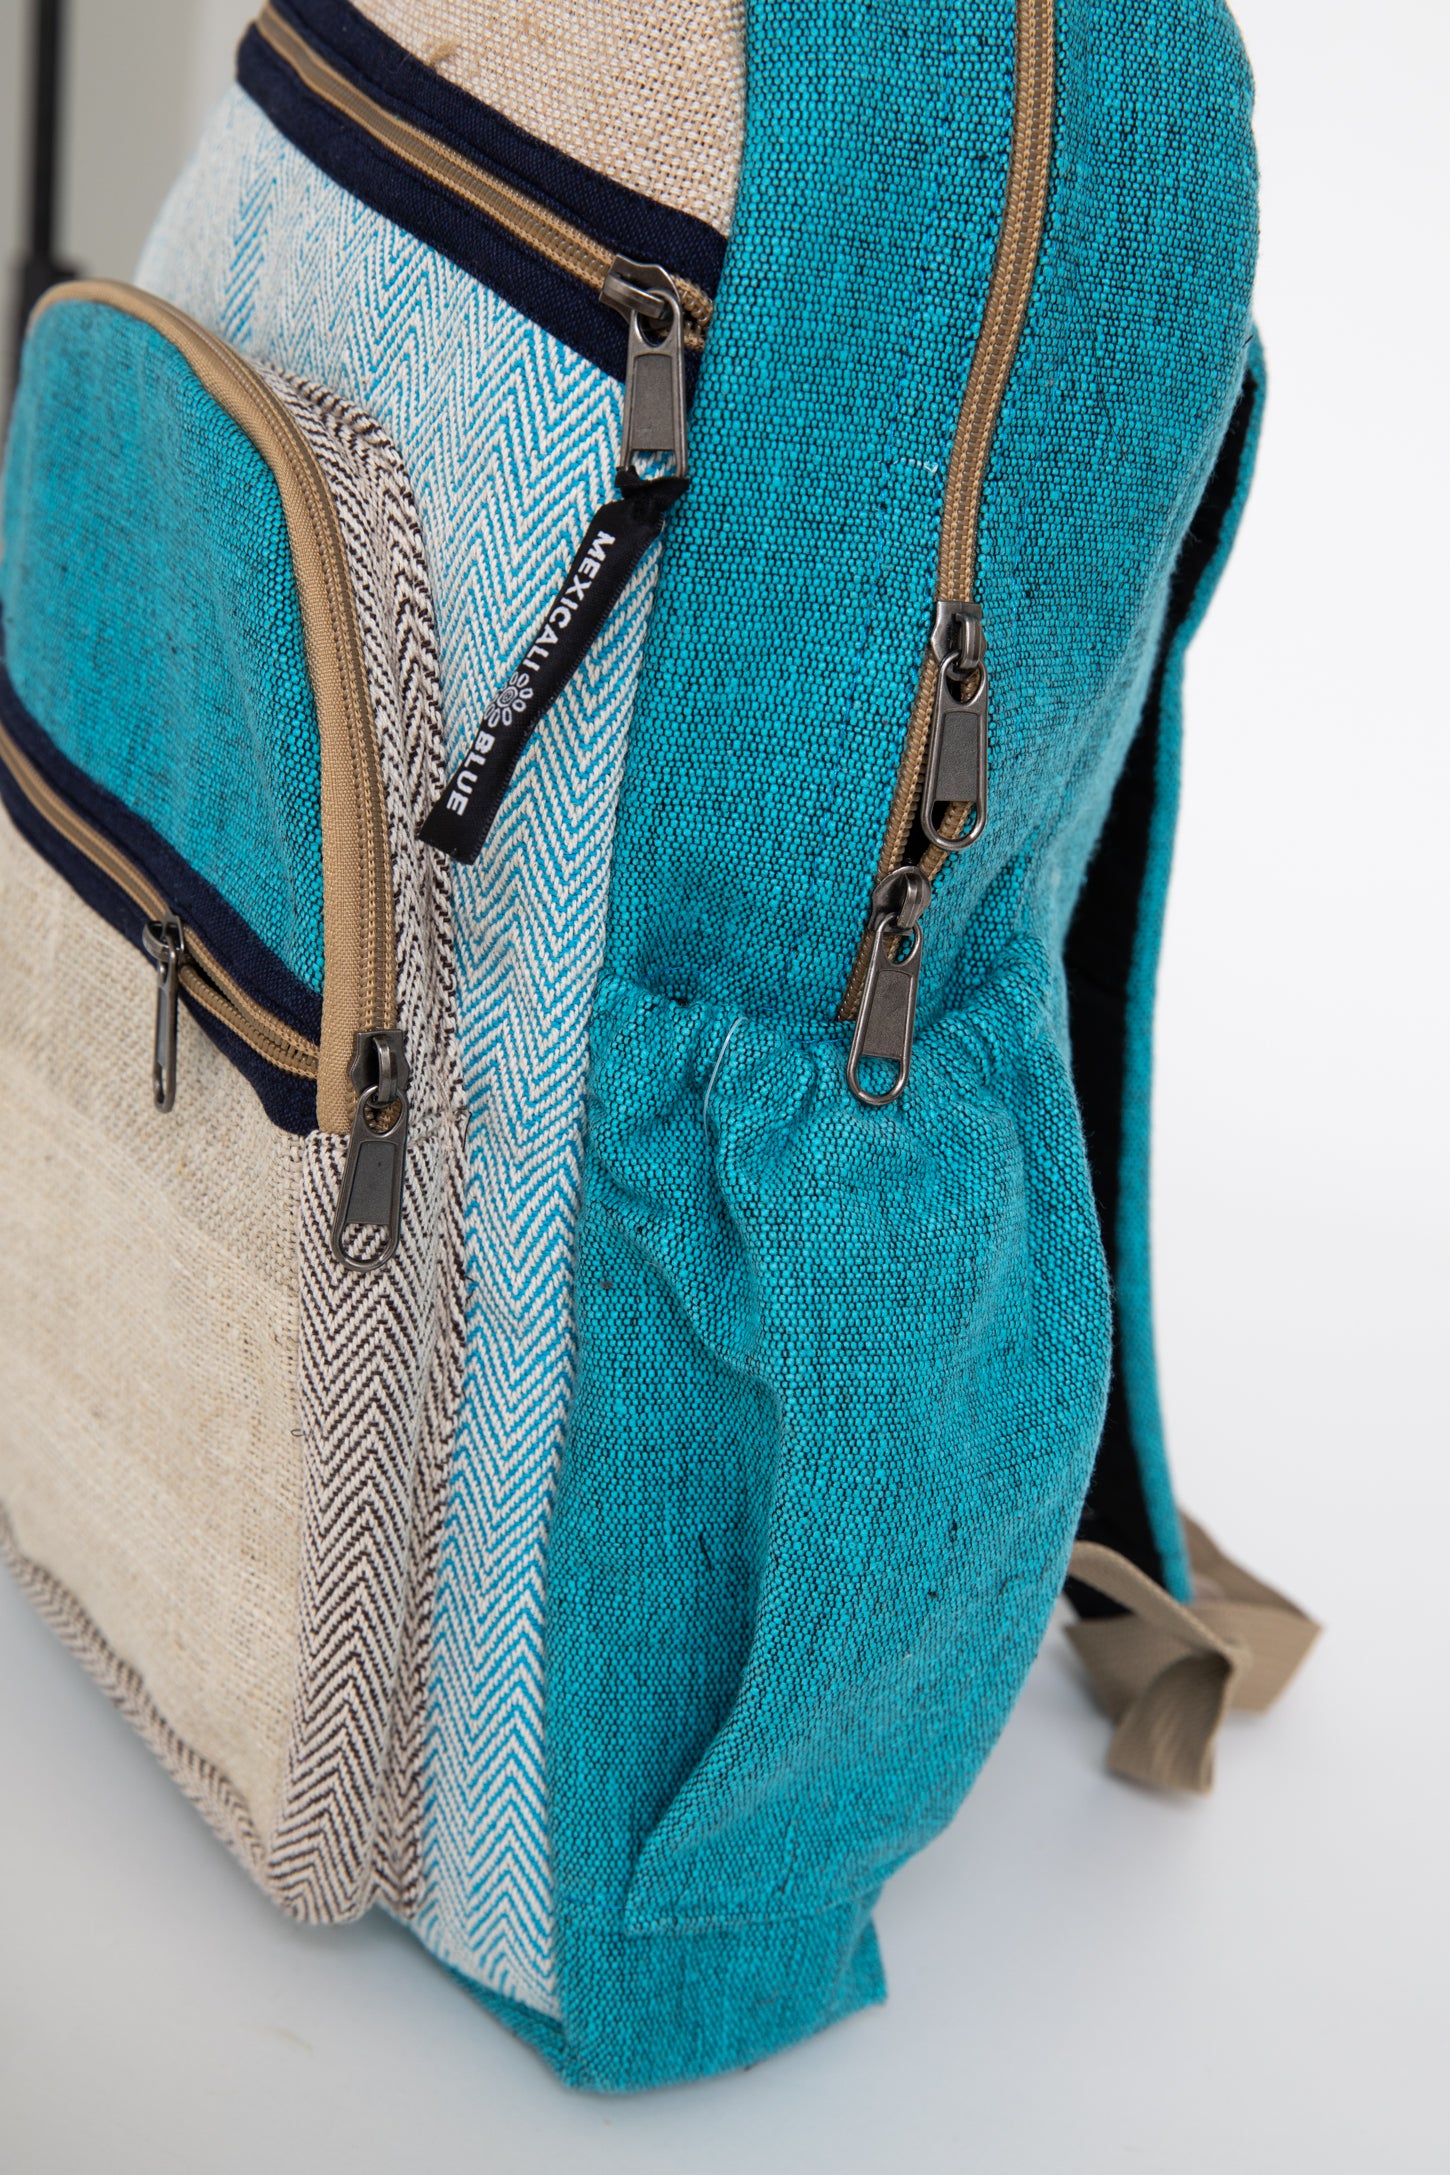 Bhanga Hemp Backpack with Laptop Compartment